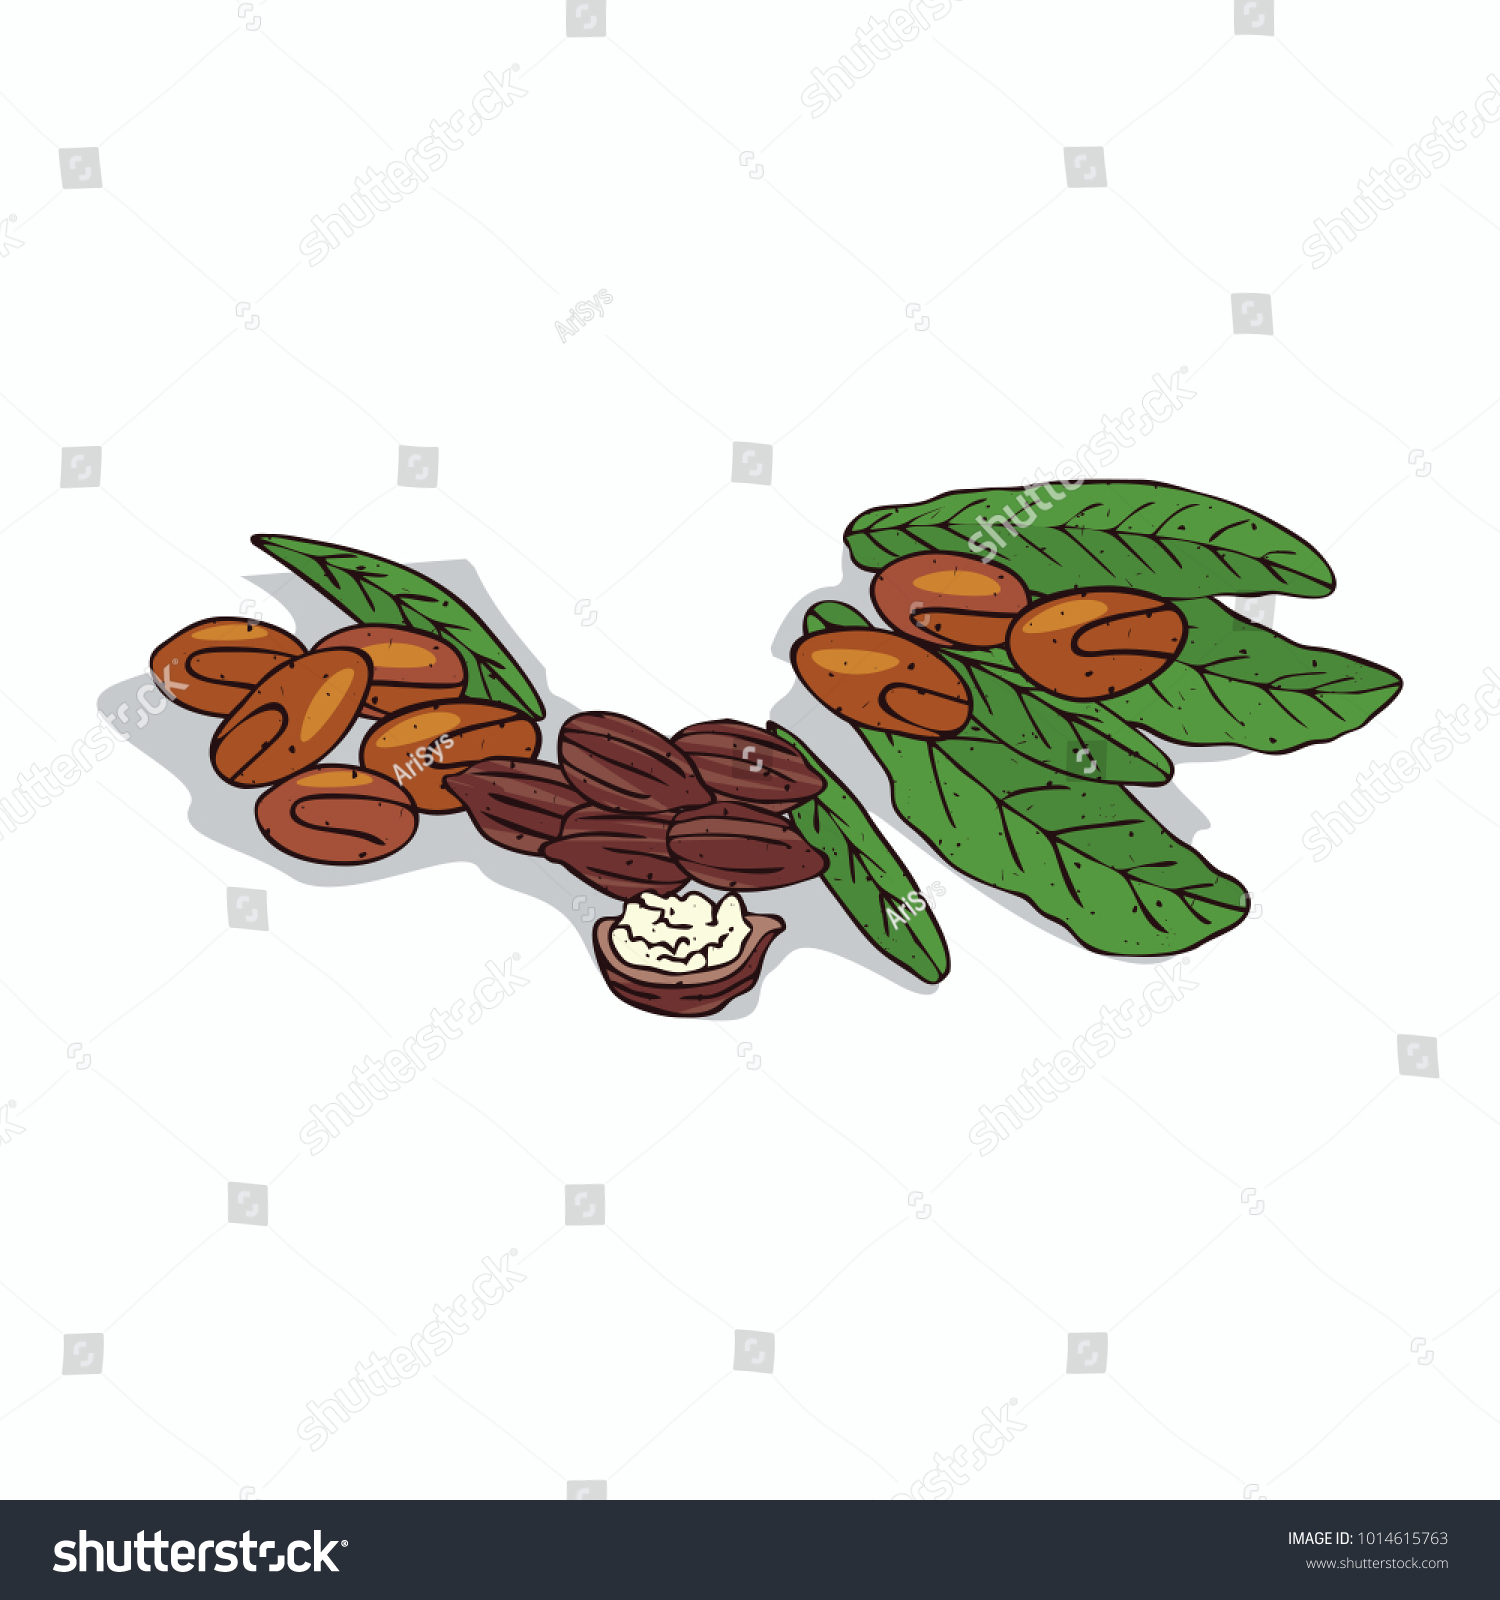 SVG of Isolated clipart of plant Shea tree on white background. Botanical drawing of herb Vitellaria paradoxa with nuts and leaves. Vector illustration svg